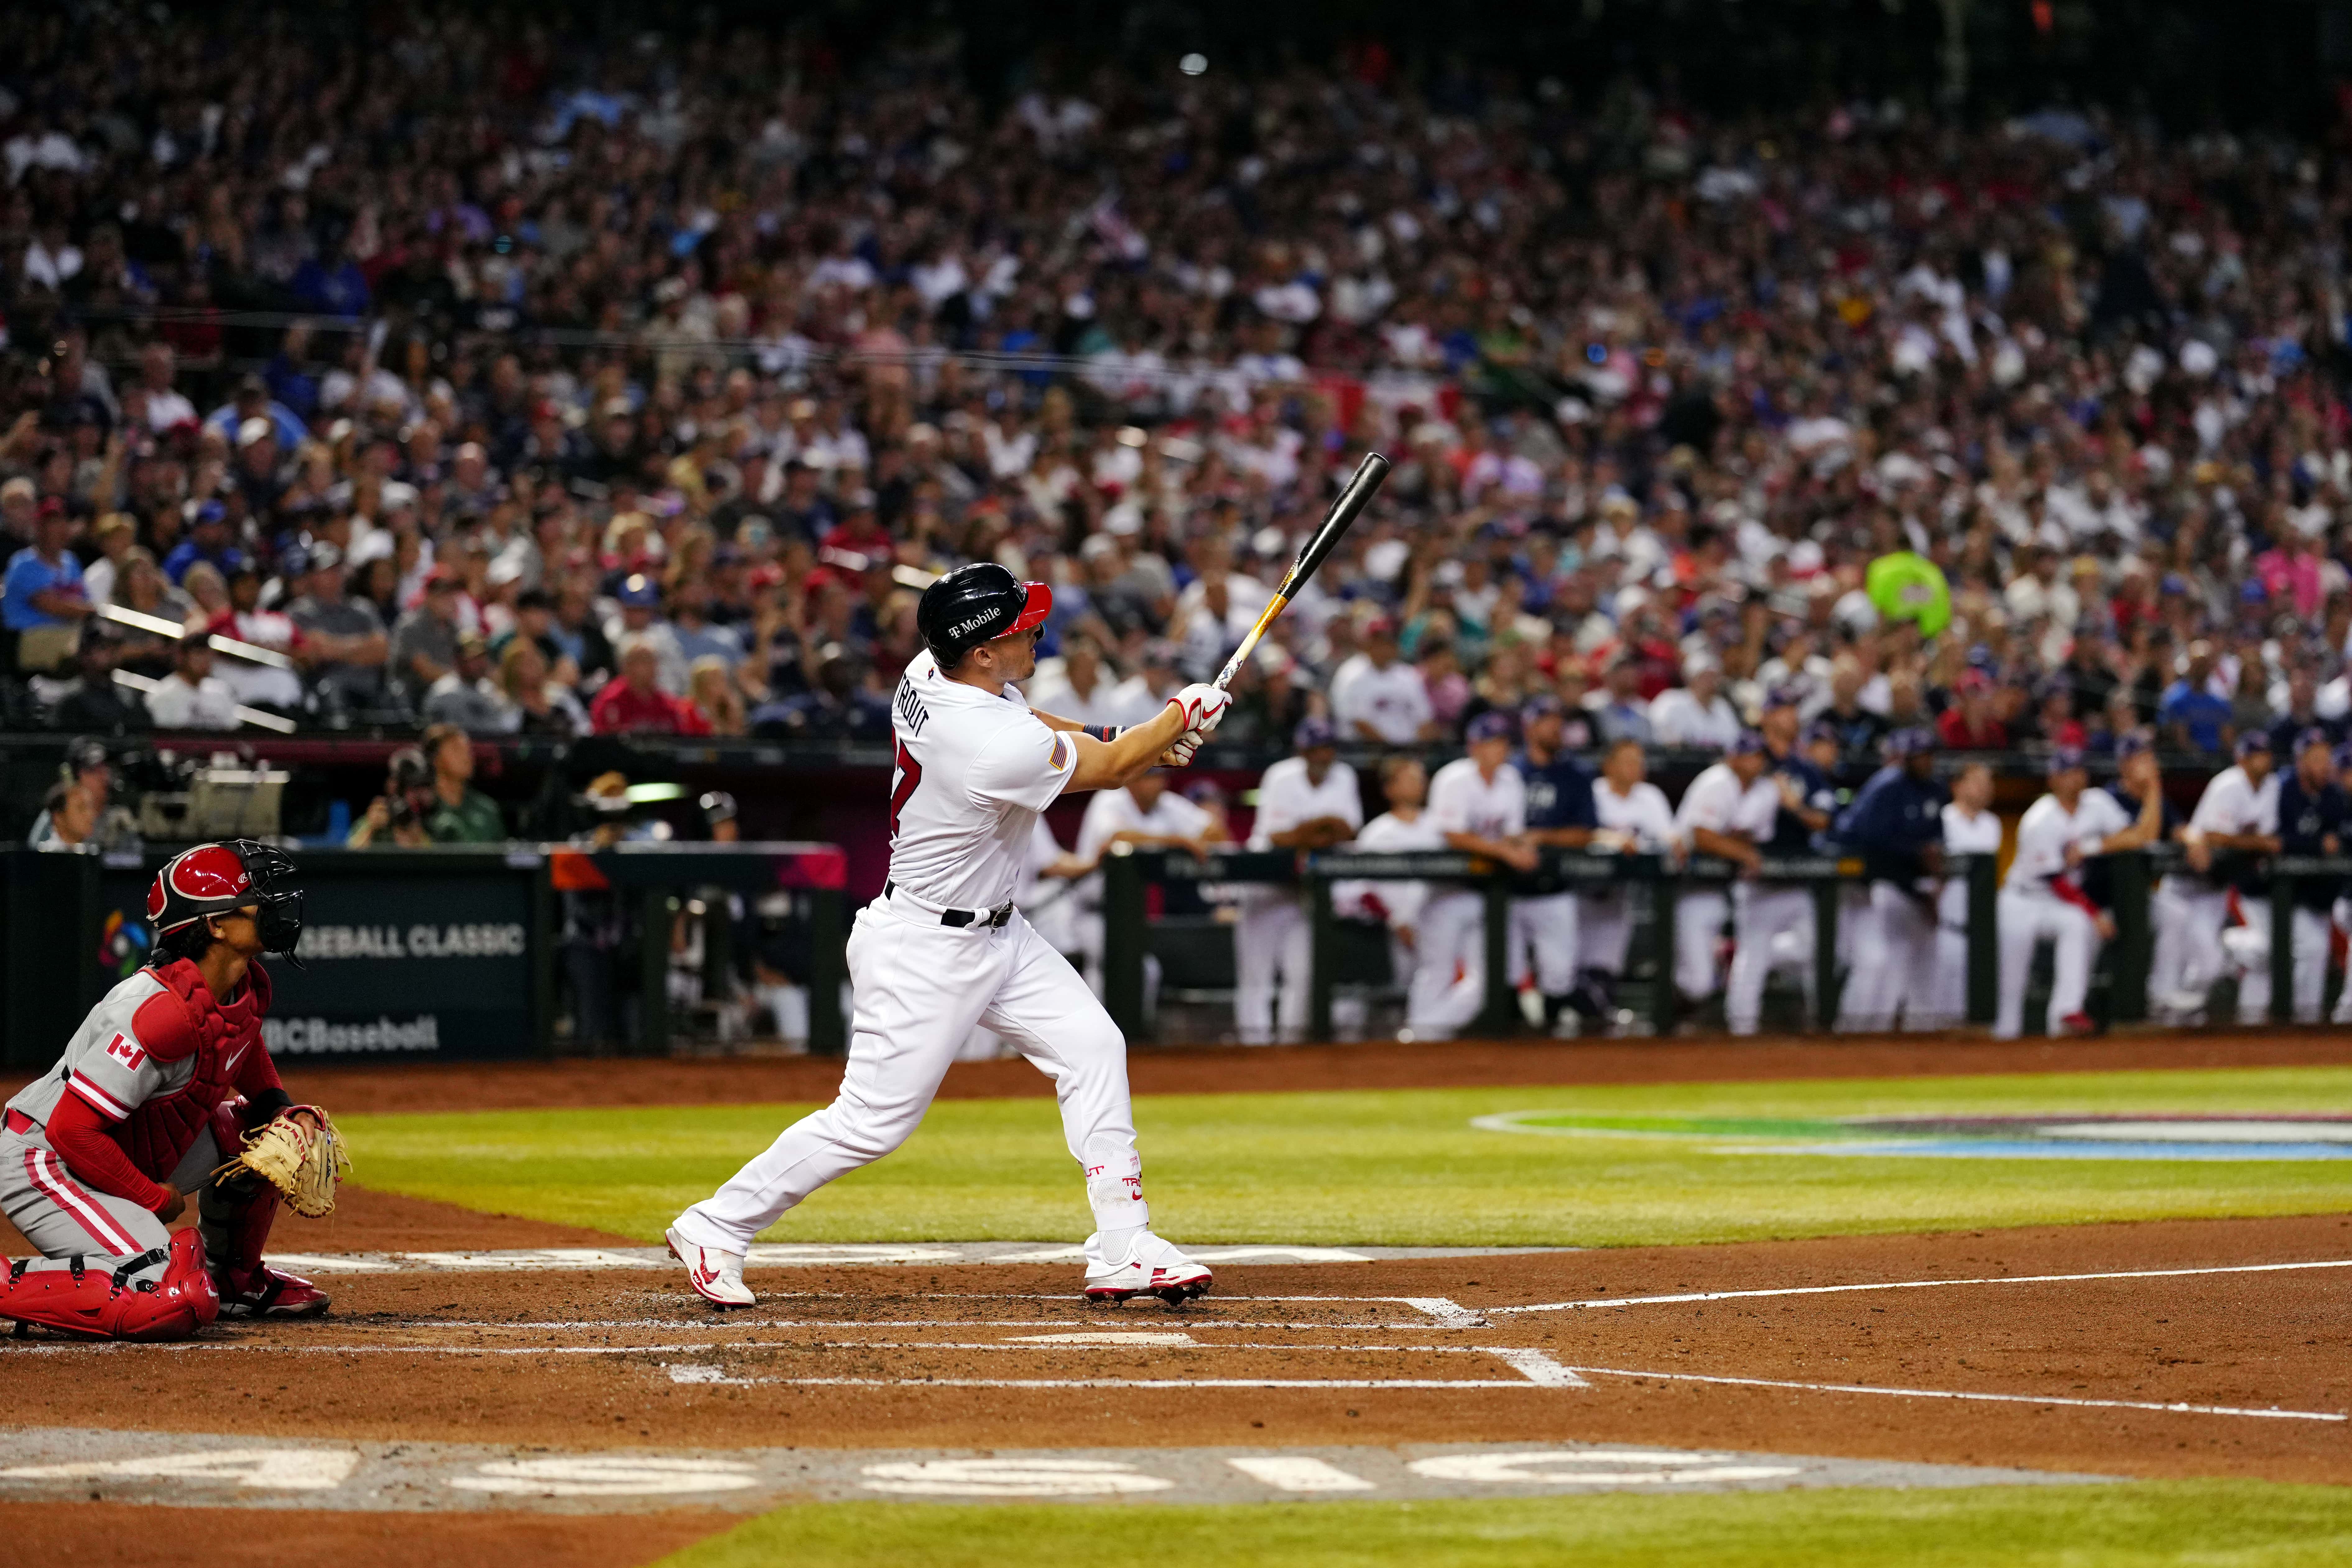 WBC Daily: Team USA breaks out, a perfect game, an incredible inning